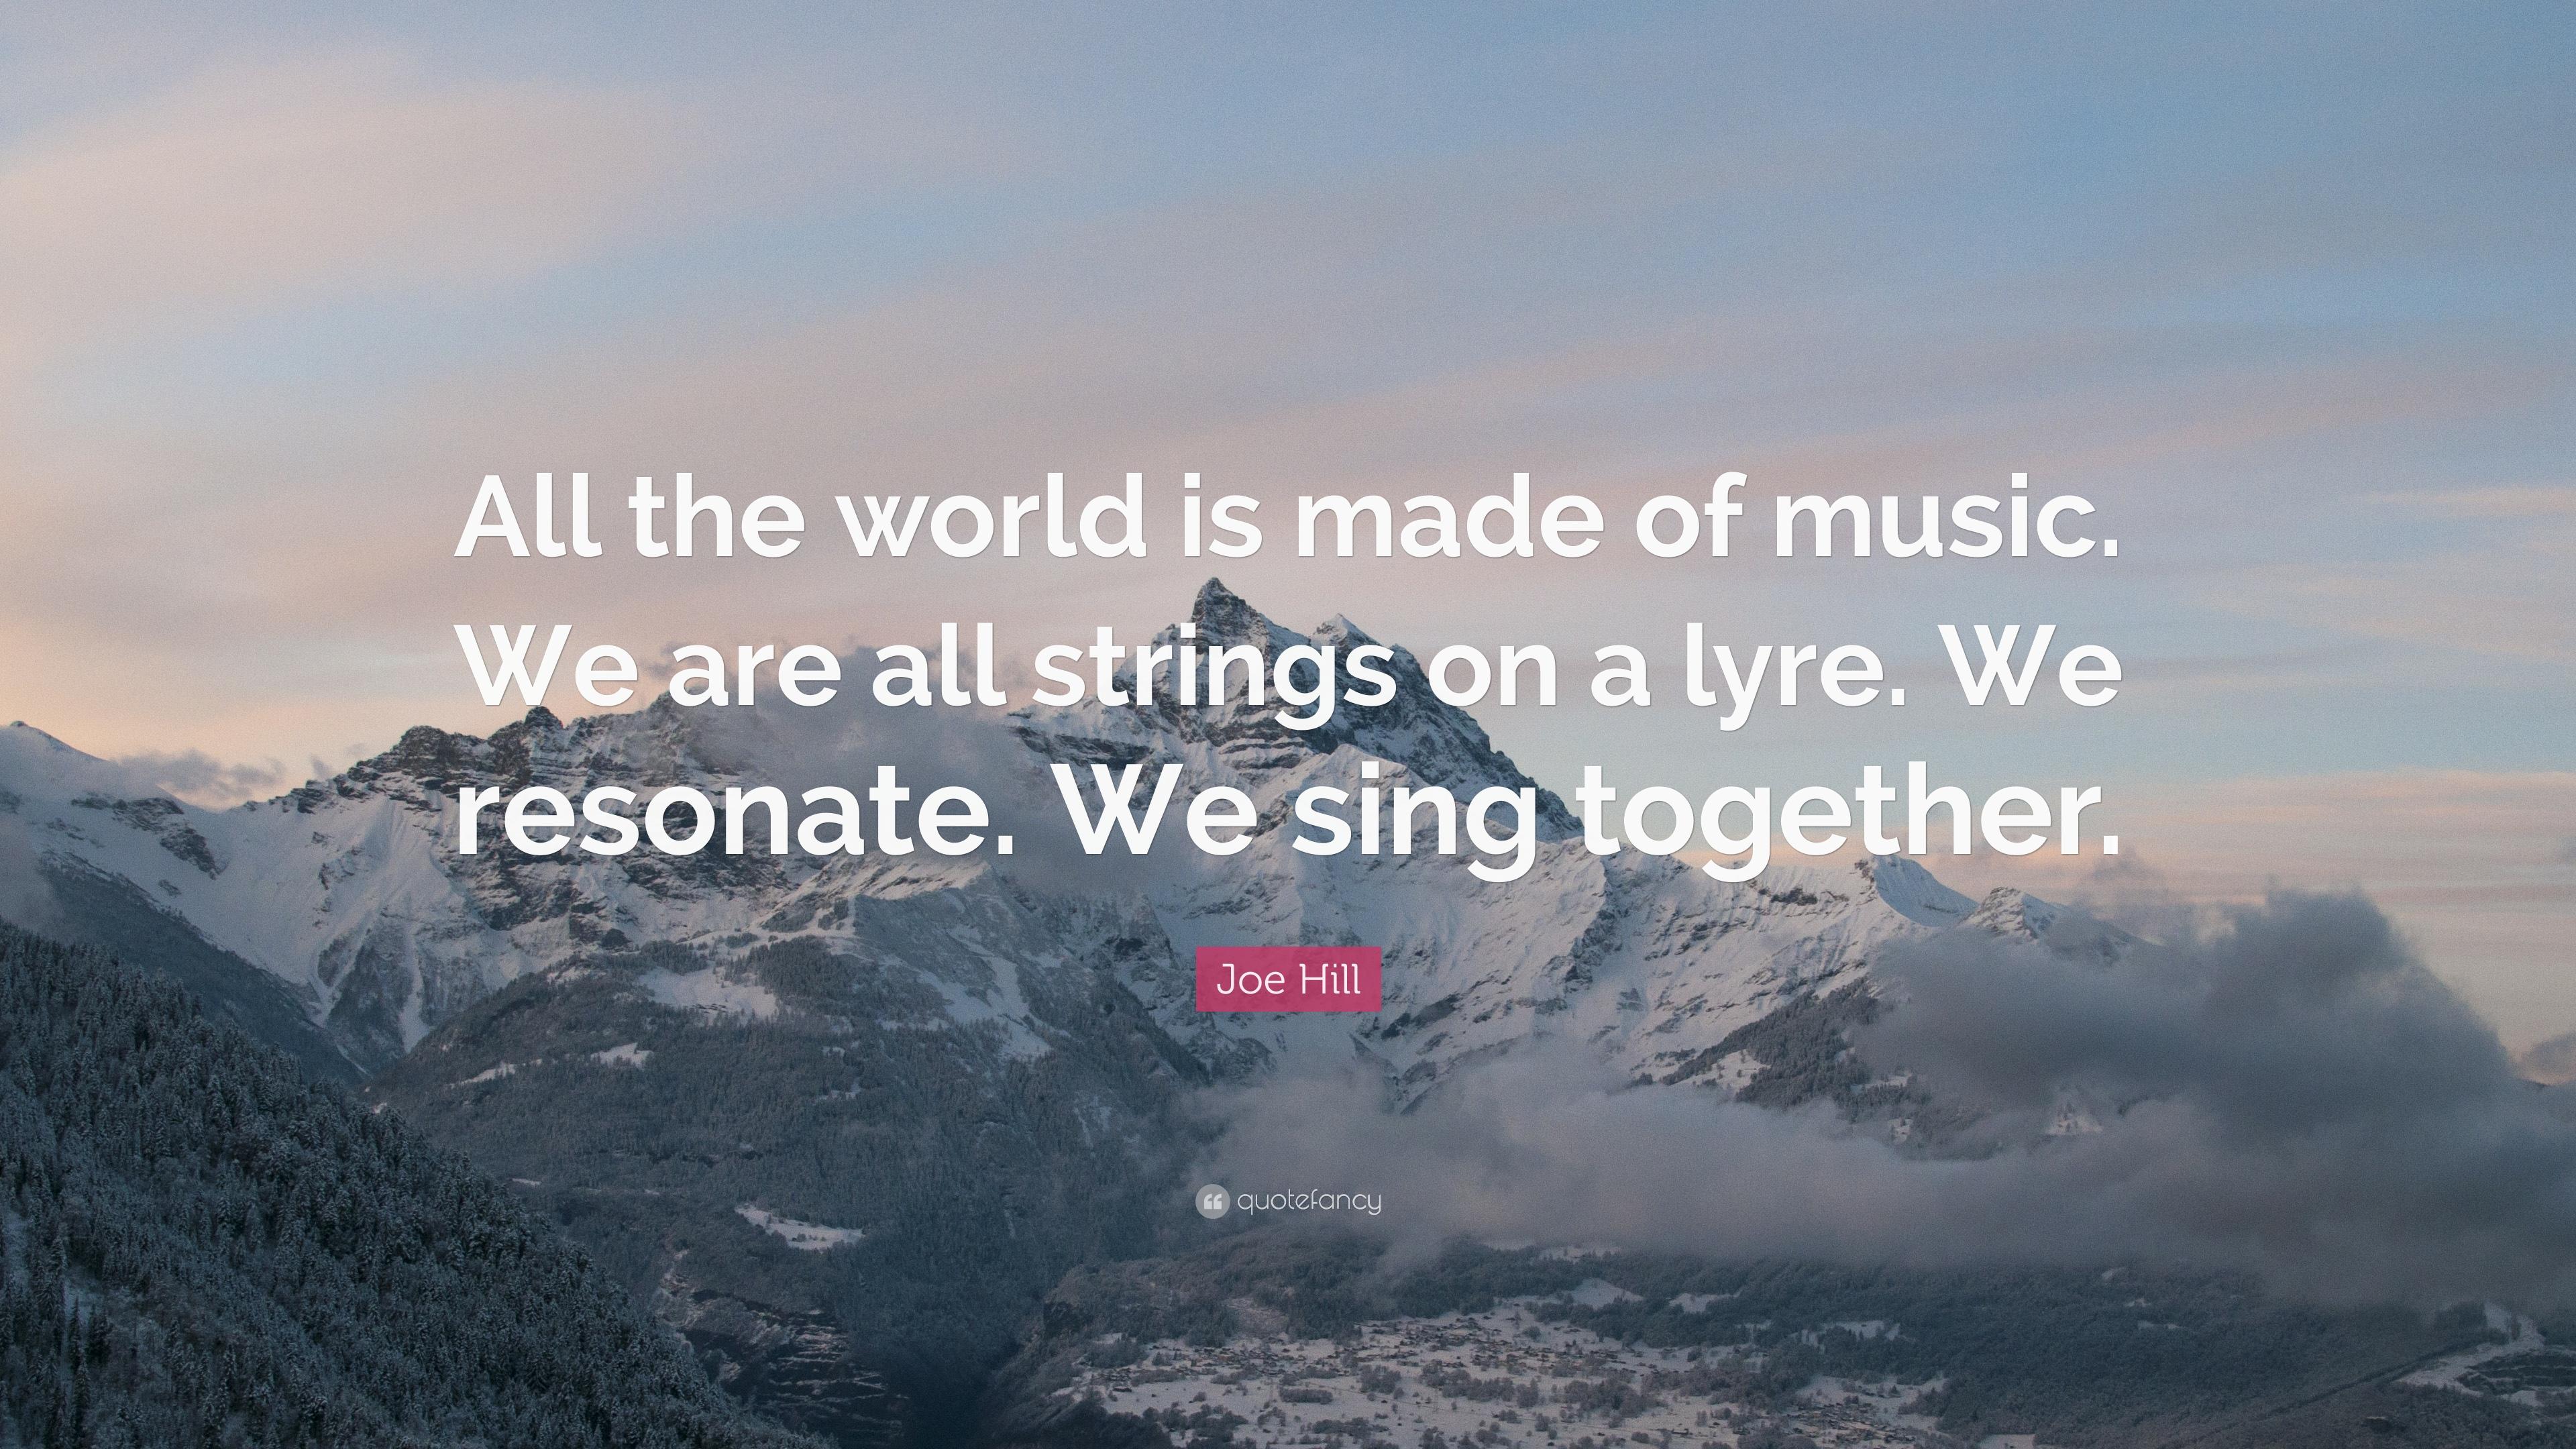 Joe Hill Quote: “All the world is made of music. We are all strings